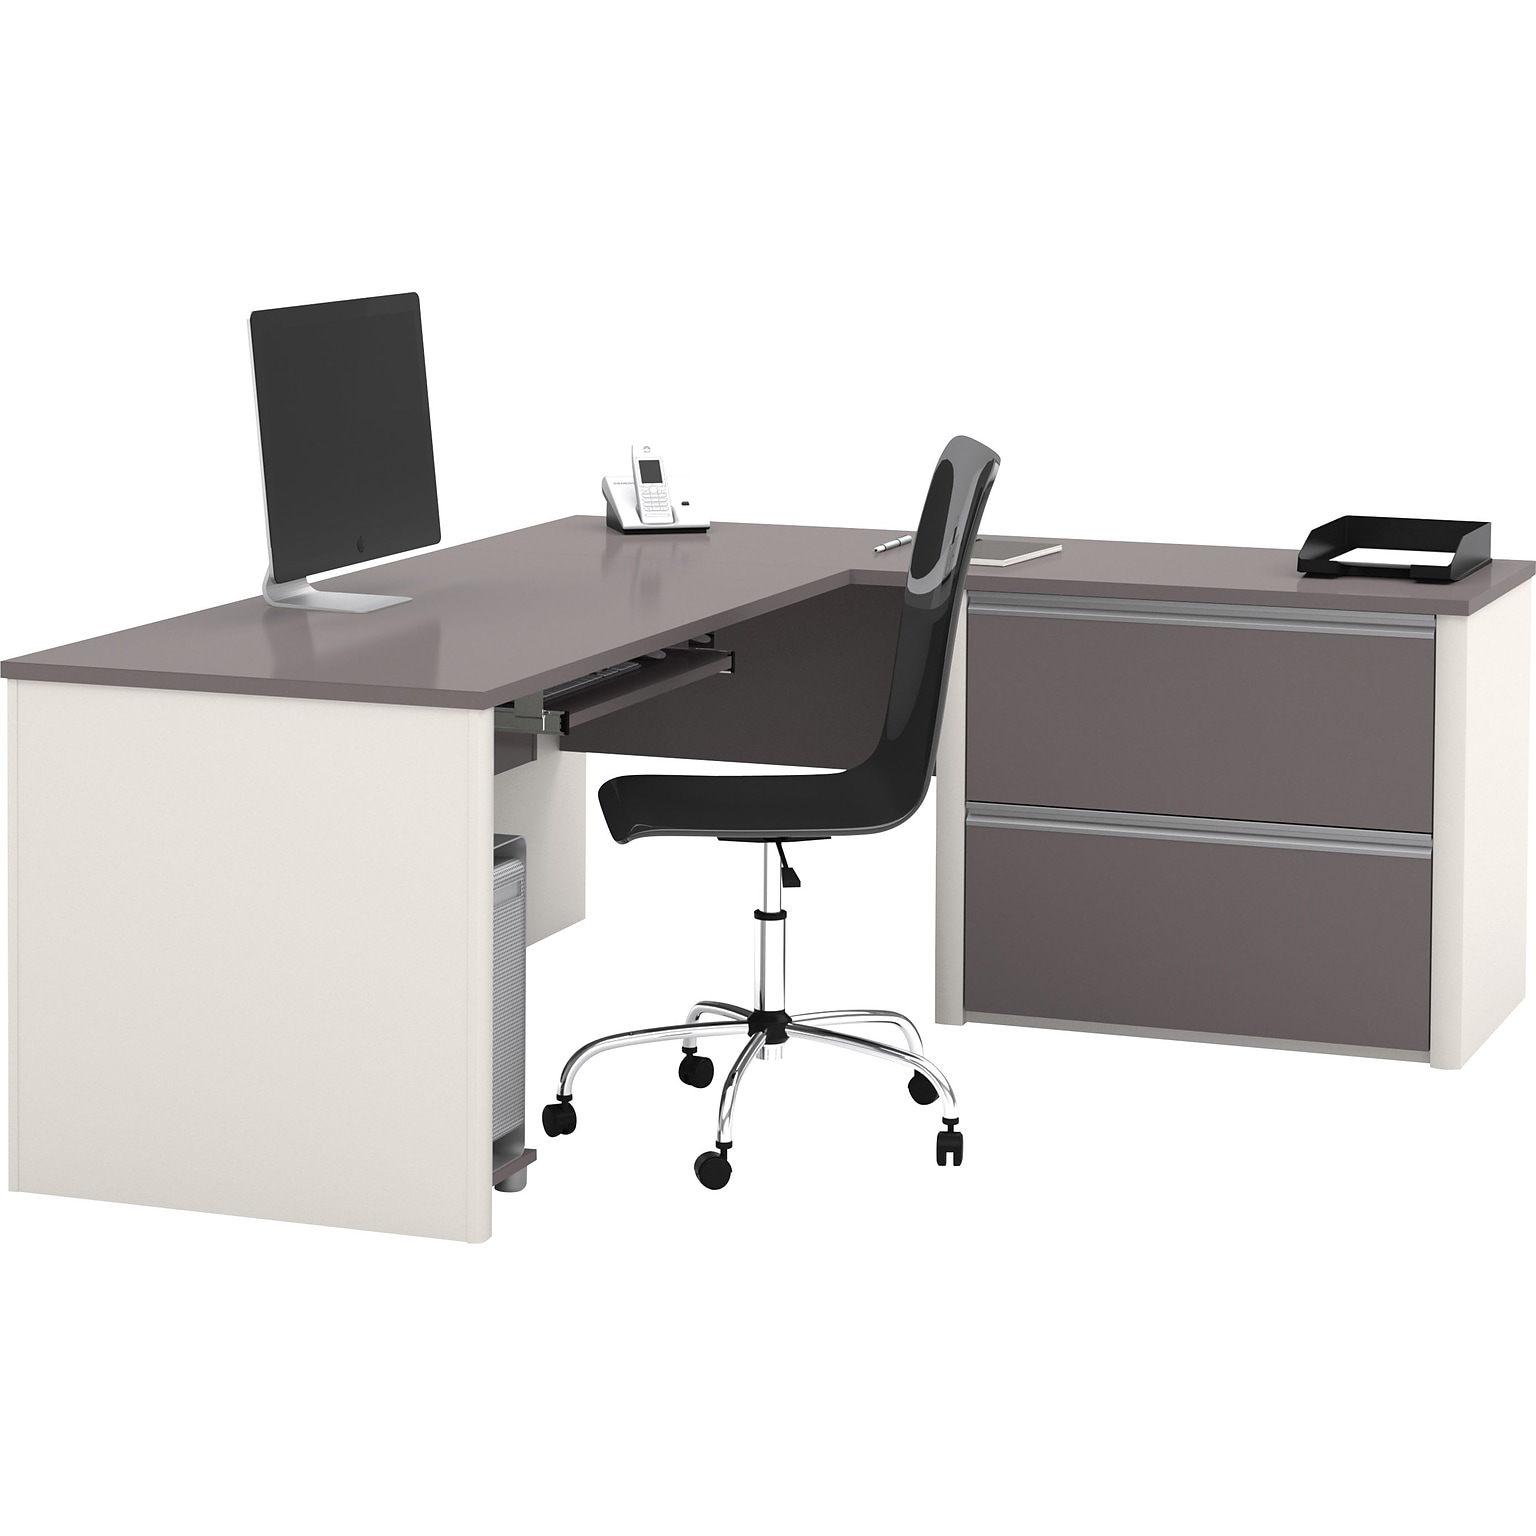 Bestar Connexion Collection 71W L-Shaped Desk with Oversize Pedestal, Sandstone and Slate (93862-59)